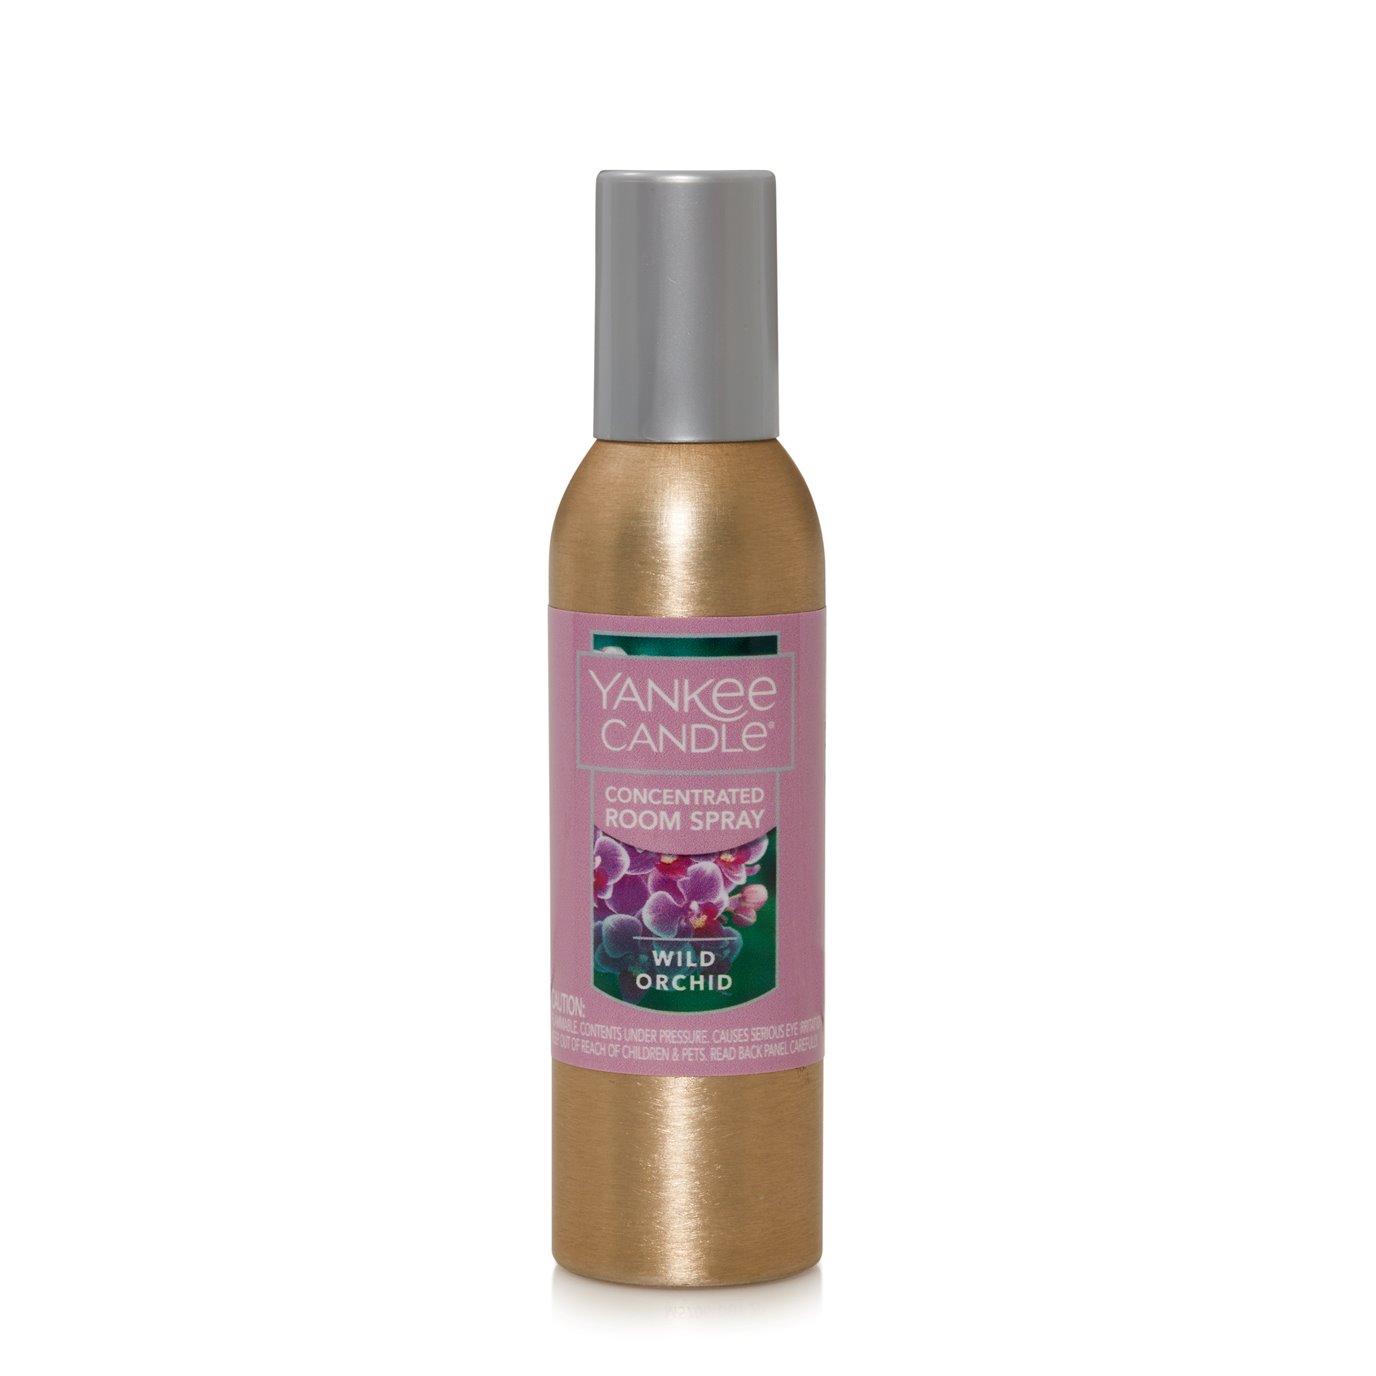 Yankee Candle Wild Orchid Concentrate Room Spray